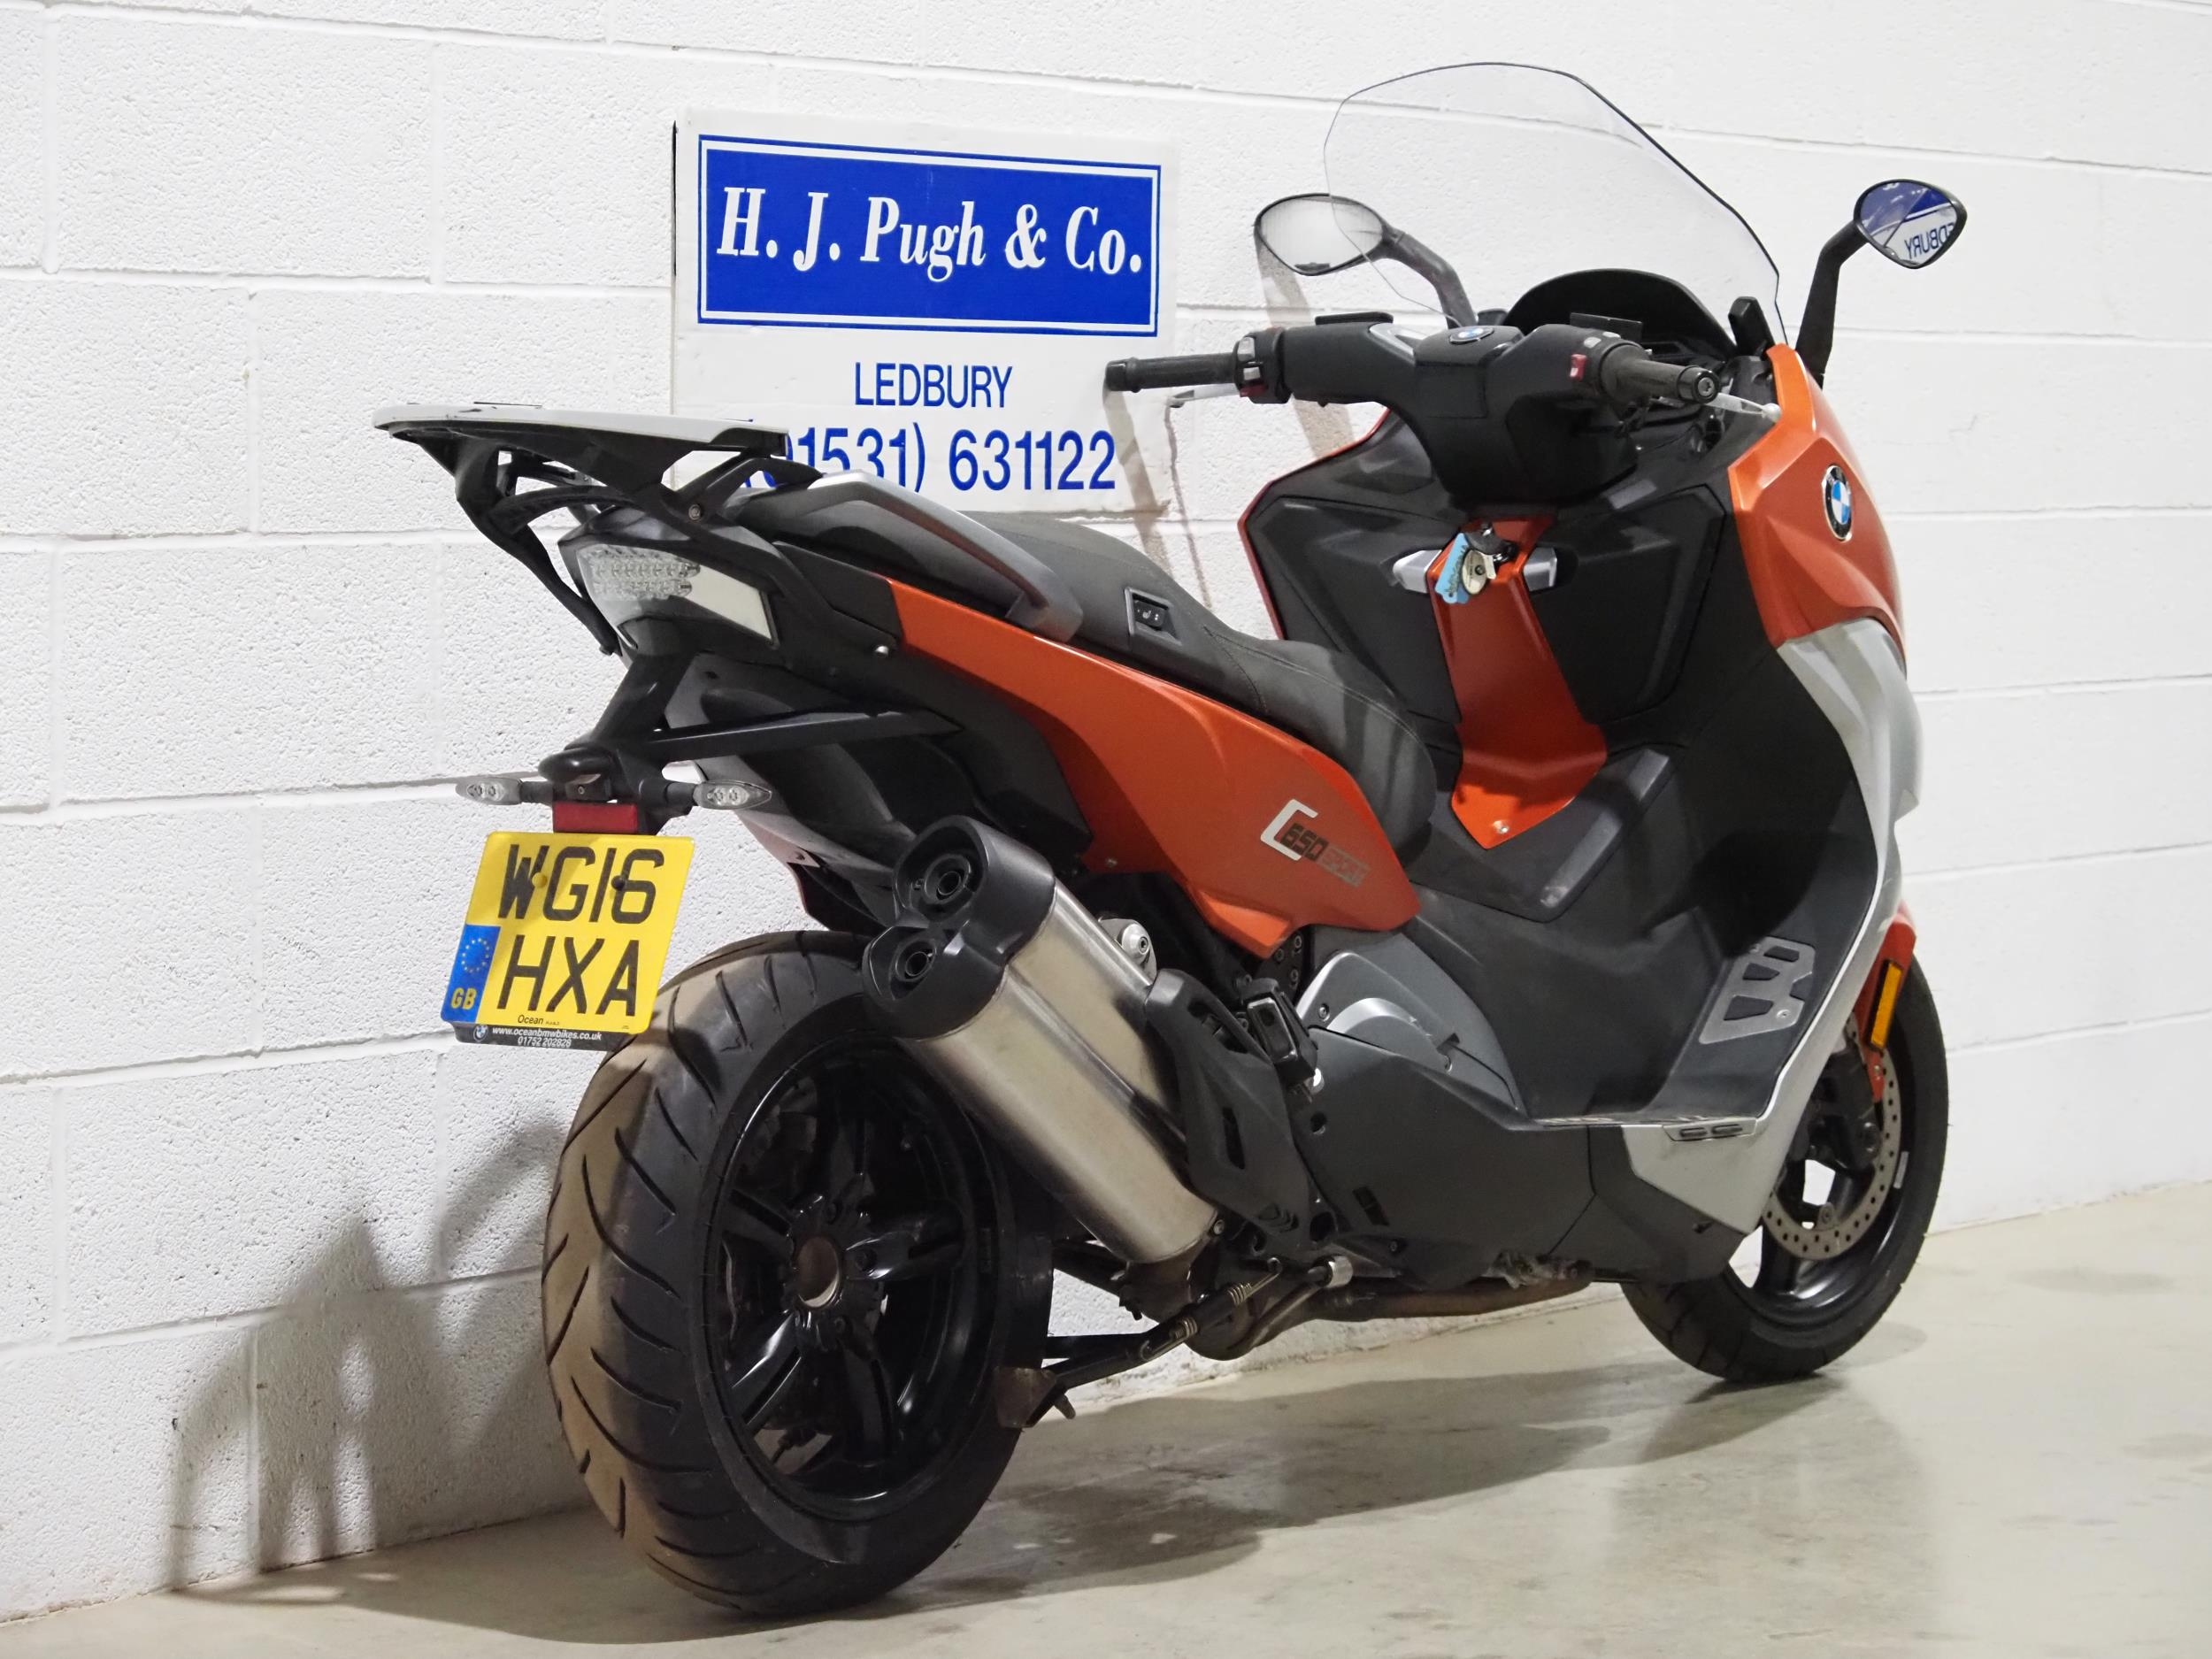 BMW C650 Sport moped. 2016. 647cc. Non runner. Engine turns over and last run in 2020. Comes with - Image 3 of 5